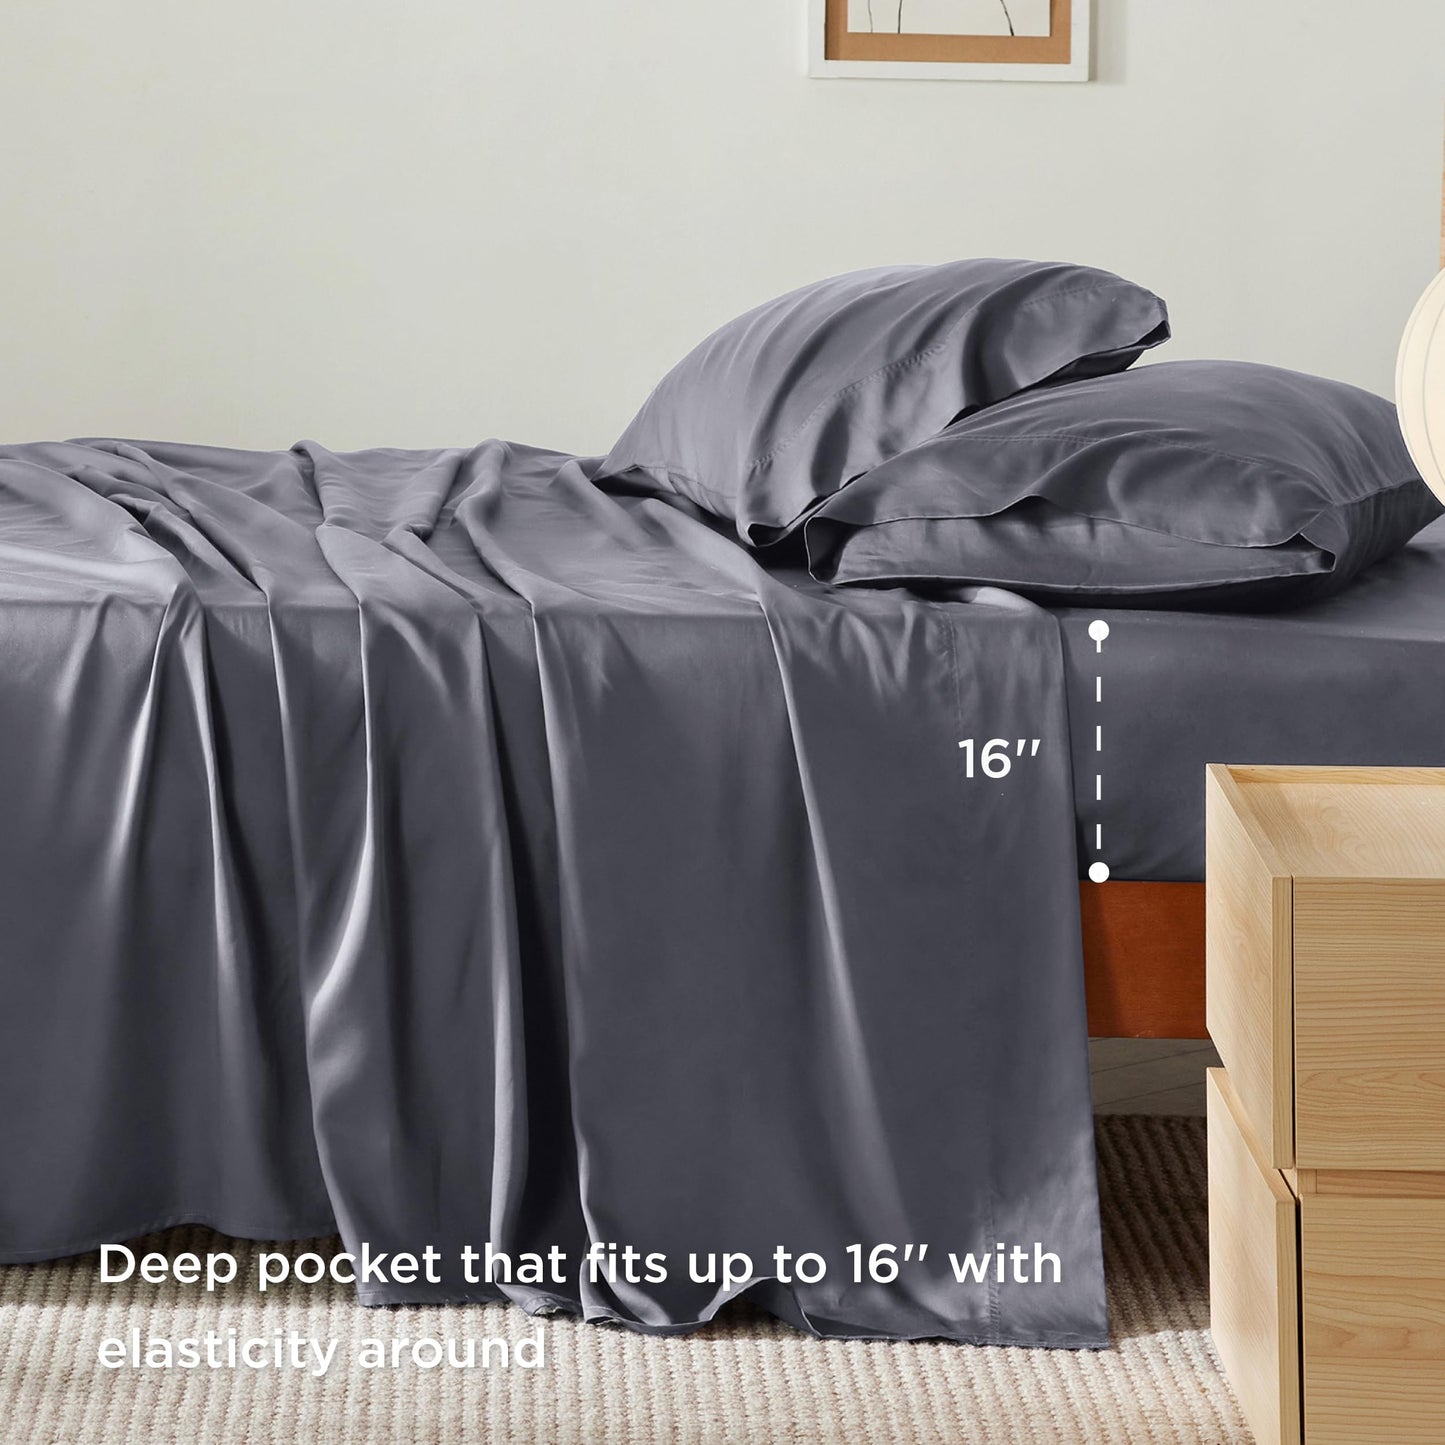 Bedsure Queen Sheets, Queen Cooling Sheet Set, Deep Pocket Up to 16", Breathable & Soft Bed Sheets, Hotel Luxury Silky Bedding Sheets & Pillowcases, Dark Grey